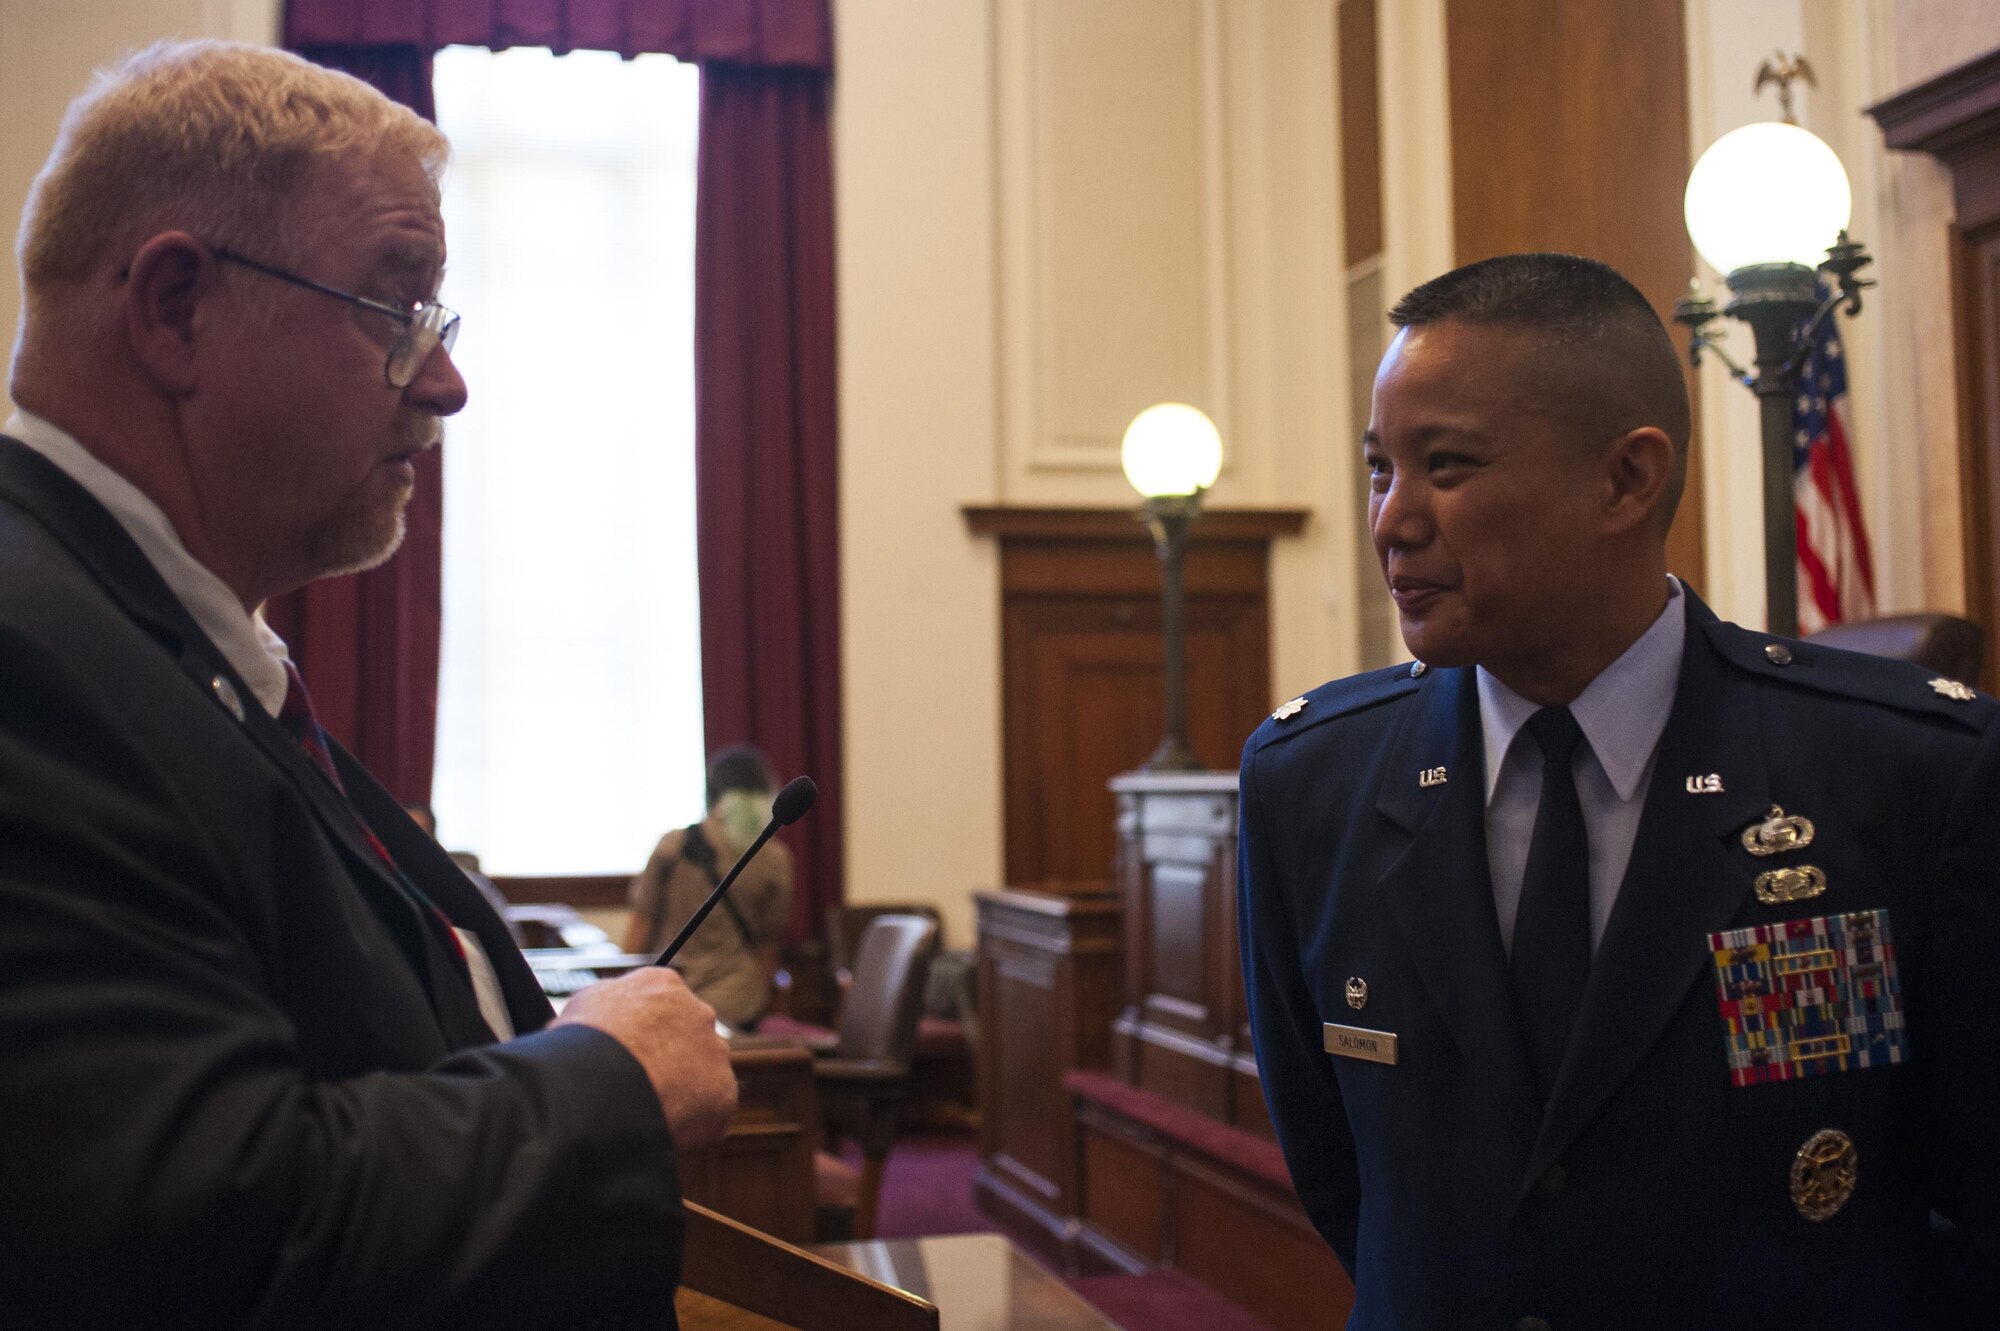 Eric Holman, San Angelo court district adjudications officer, talks with Lt. Col. Abraham Salomon, 17th Training Support Squadron commander, at the the naturalization ceremony in the O.C. Fisher Building, San Angelo, Texas, June 7, 2017. Solomon is a first generation immigrant from the Philippines. (U.S. Air Force photo by Senior Airman Scott Jackson/Released)